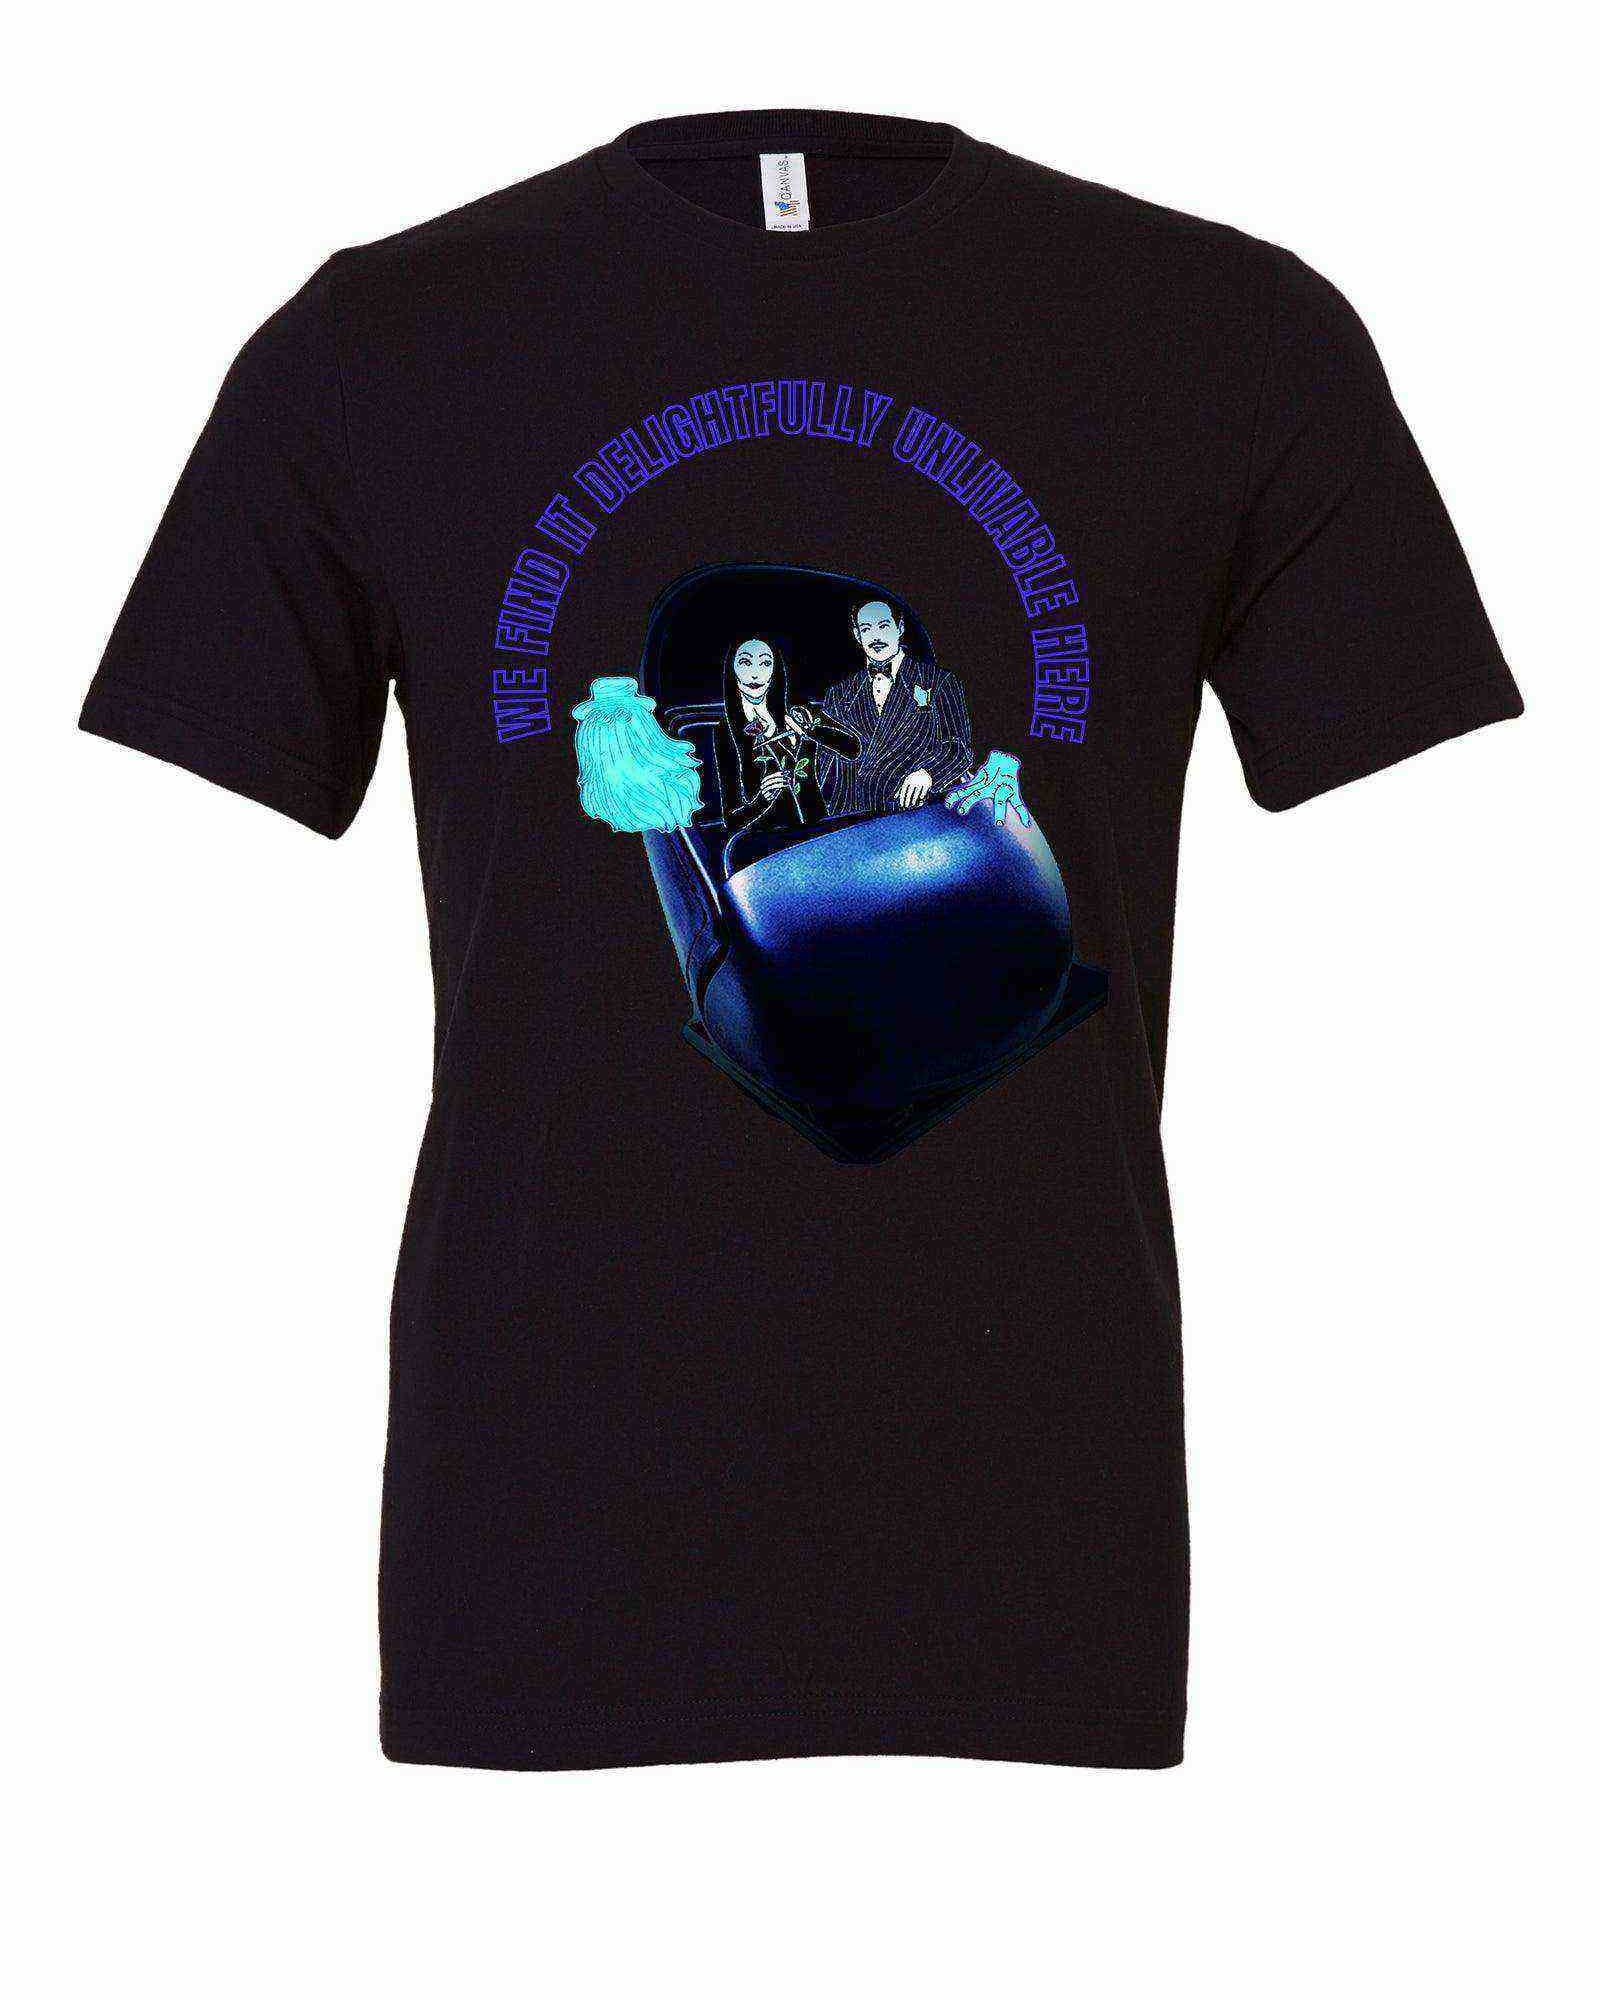 Haunted Mansion Addams Family Tee I Wednesday Tee | Haunted Mansion Ride Tee - Dylan's Tees